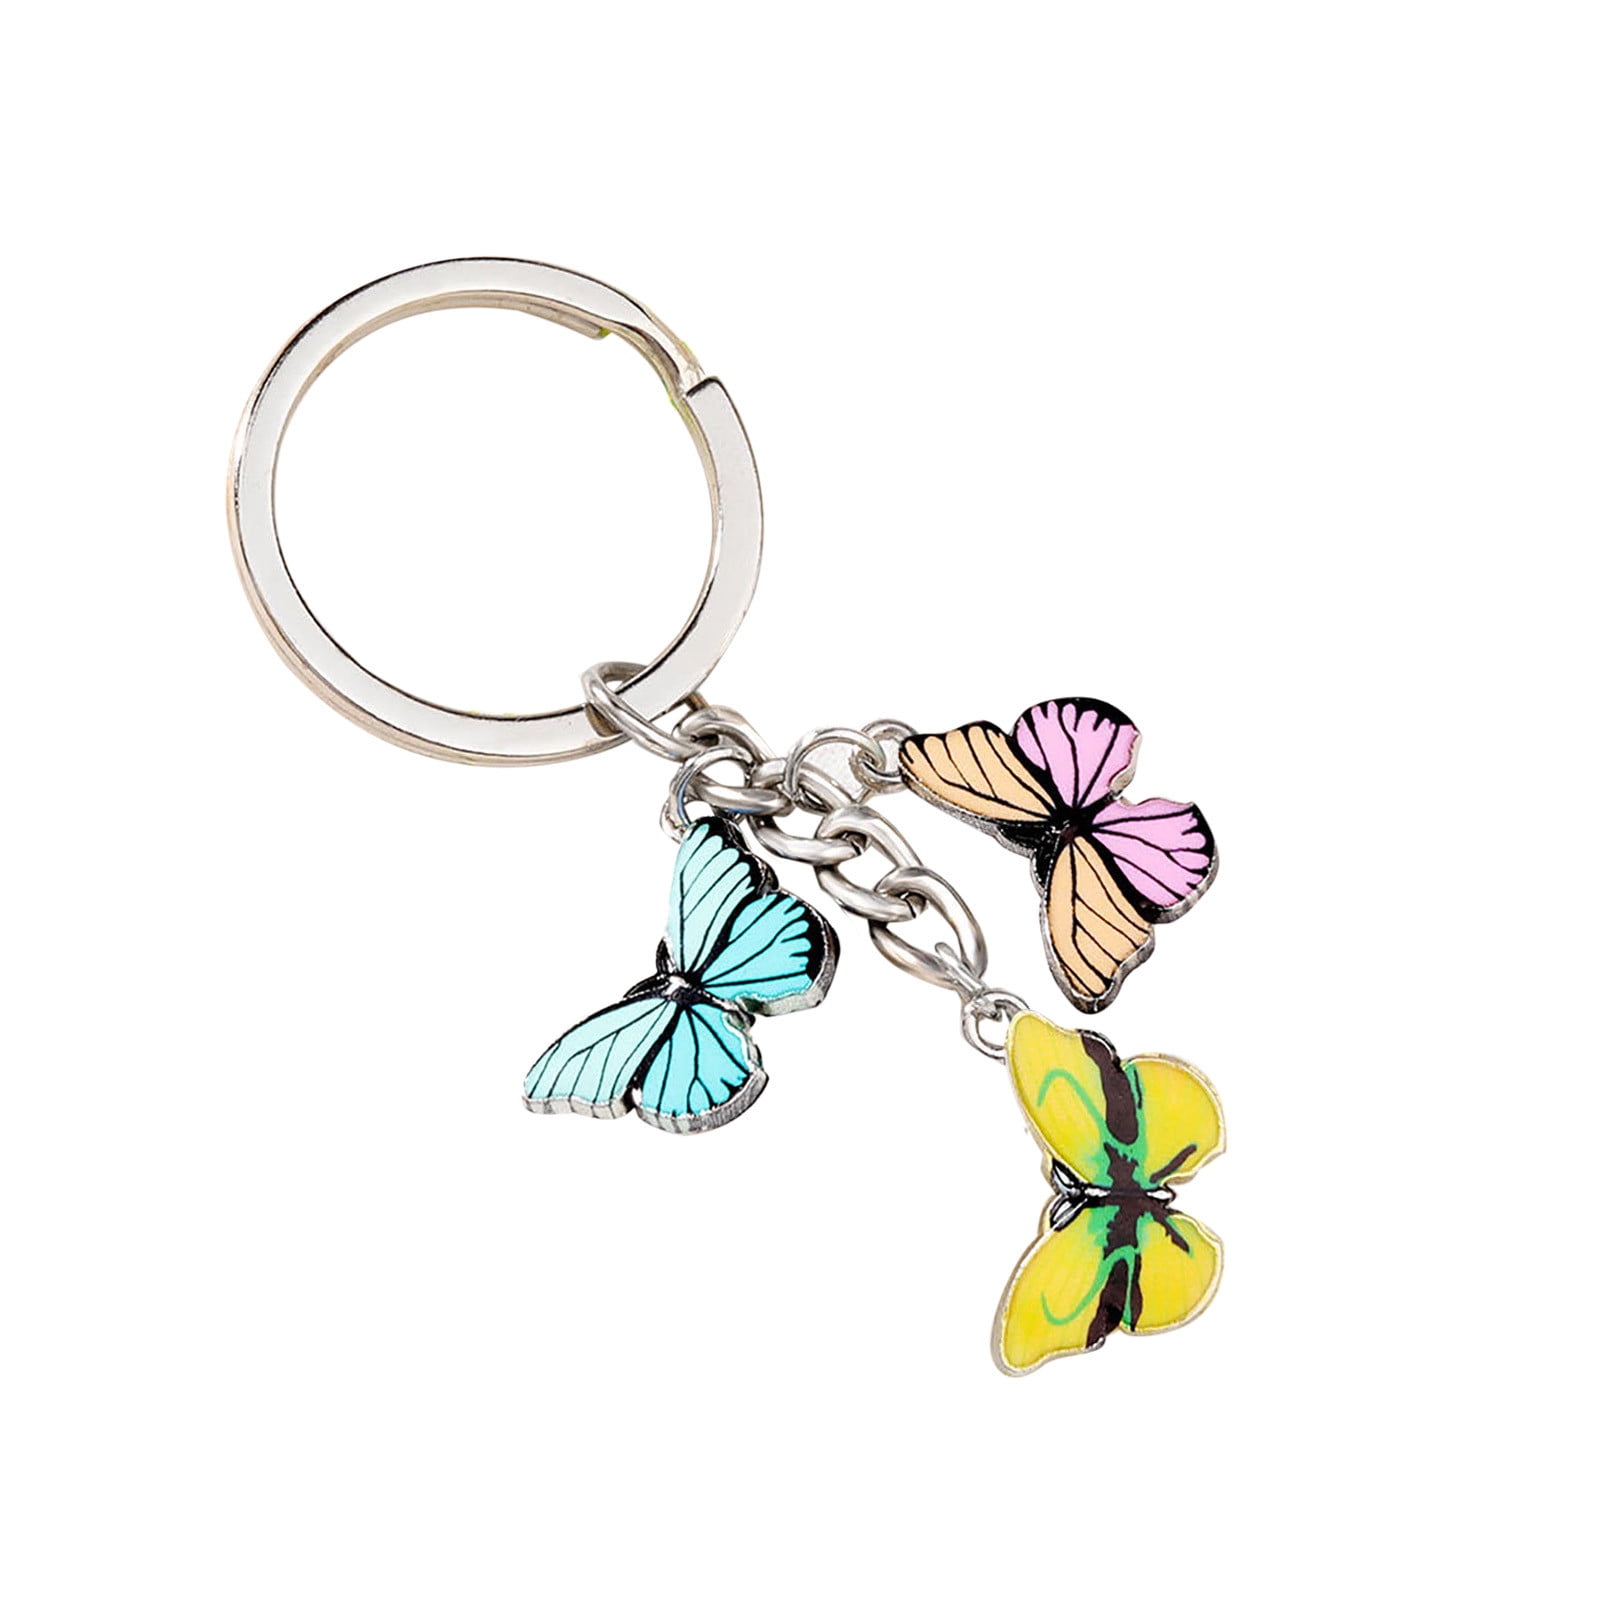 Frehsky pendant necklace Keychain Color Dripping Butterfly Pendant ...